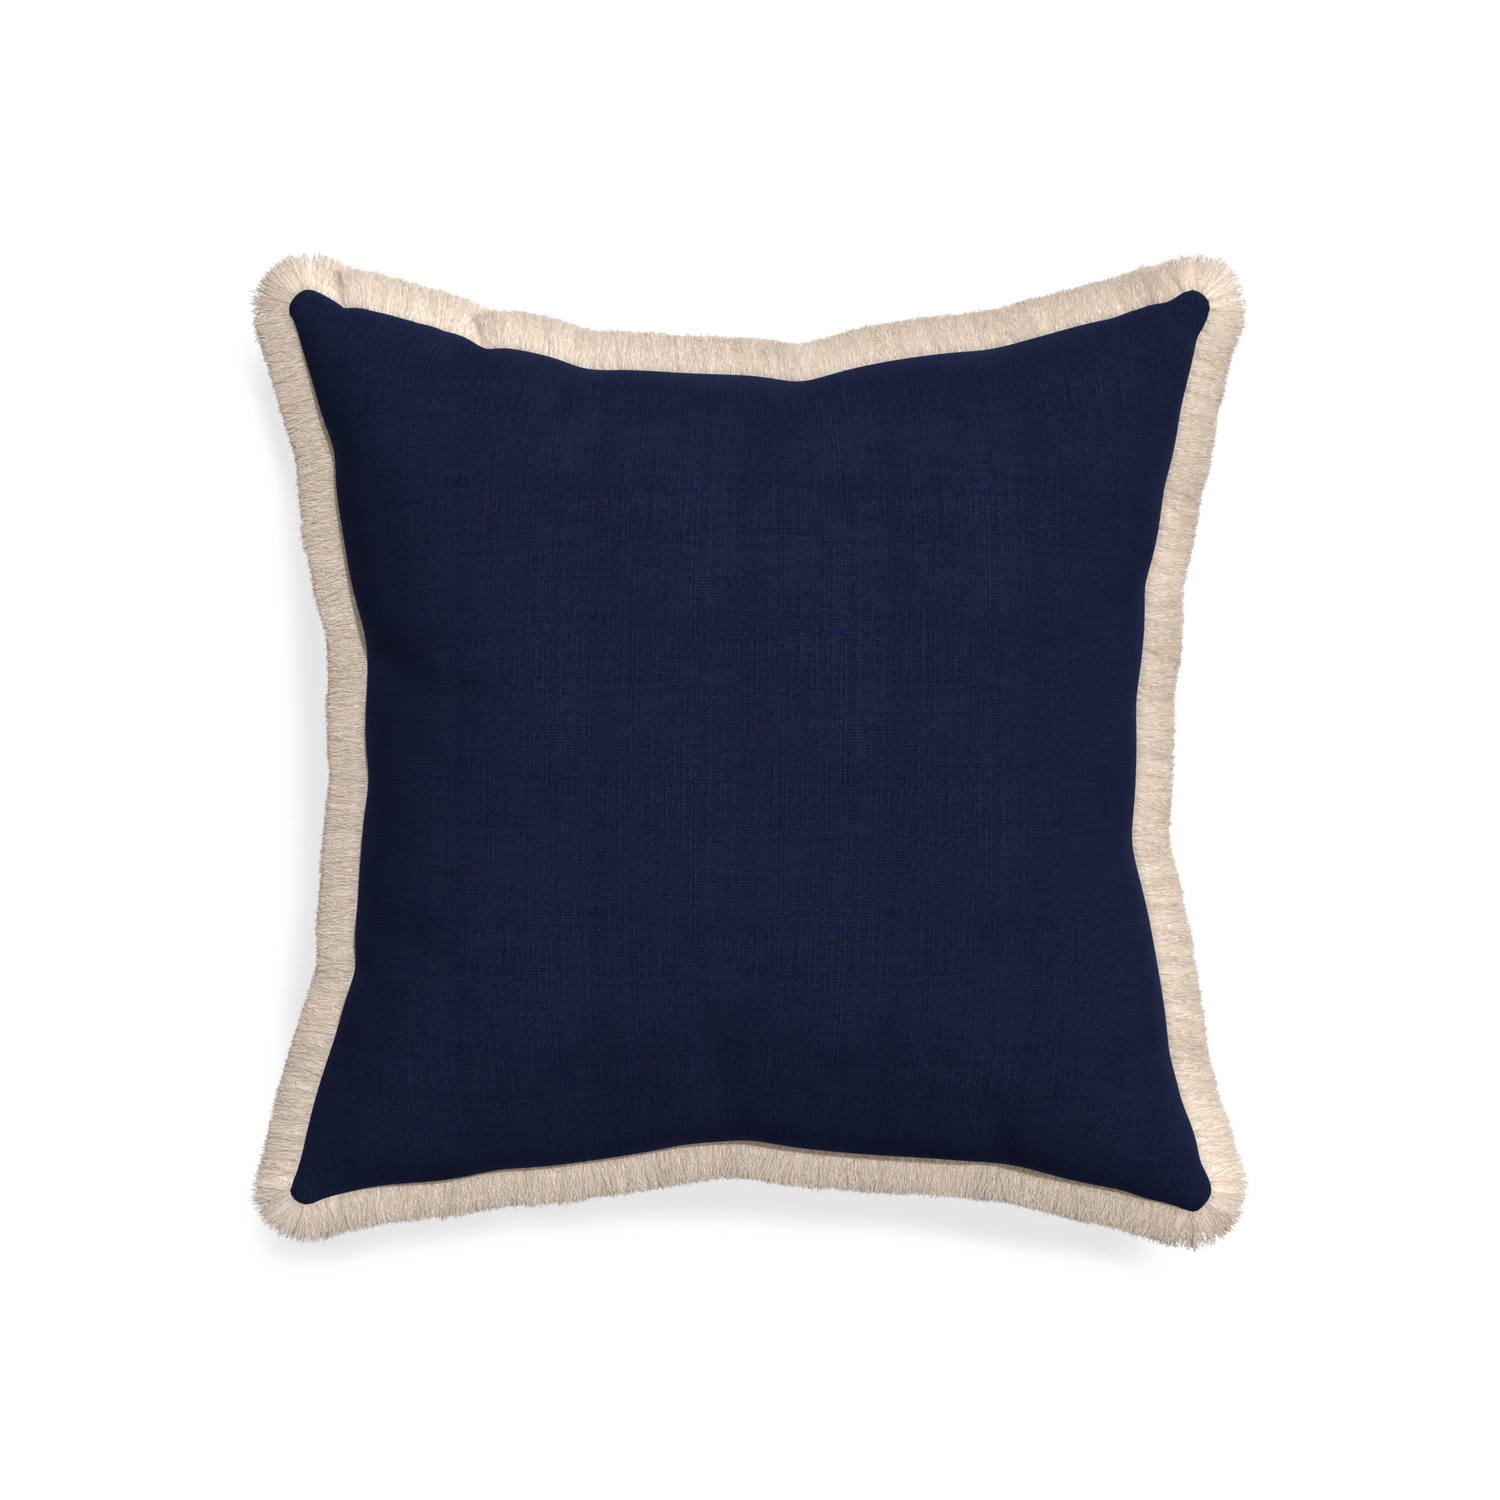 20-square midnight custom navy bluepillow with cream fringe on white background